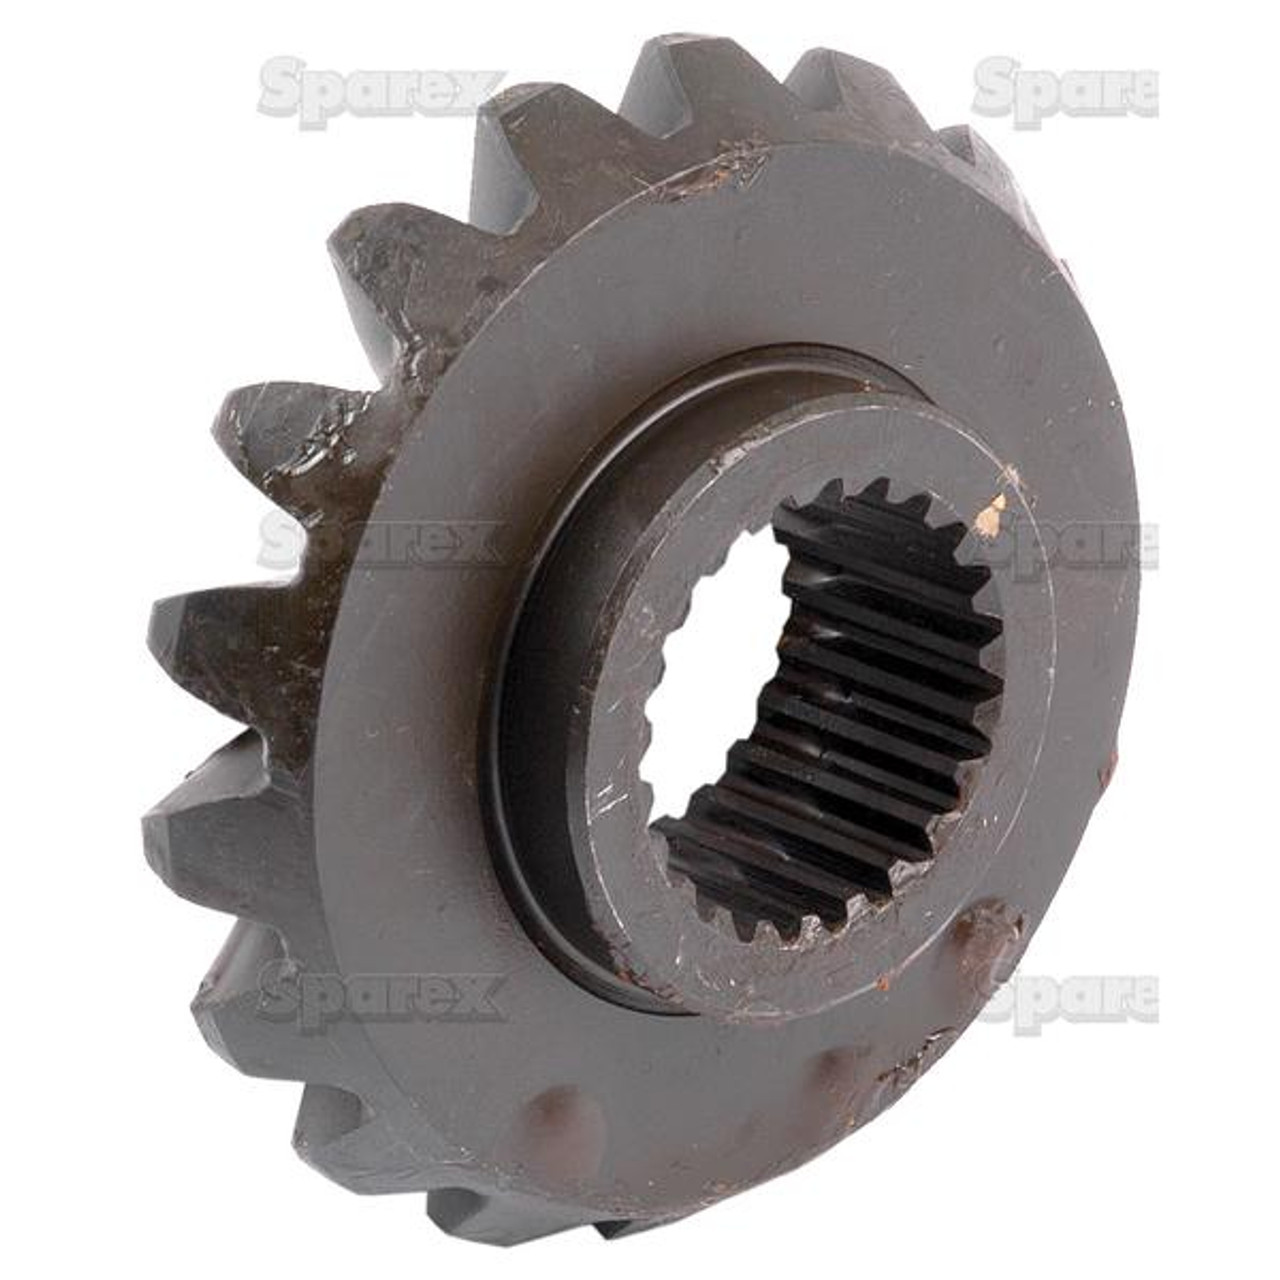 Tractor  GEAR, S-T29394 Part Number S60413